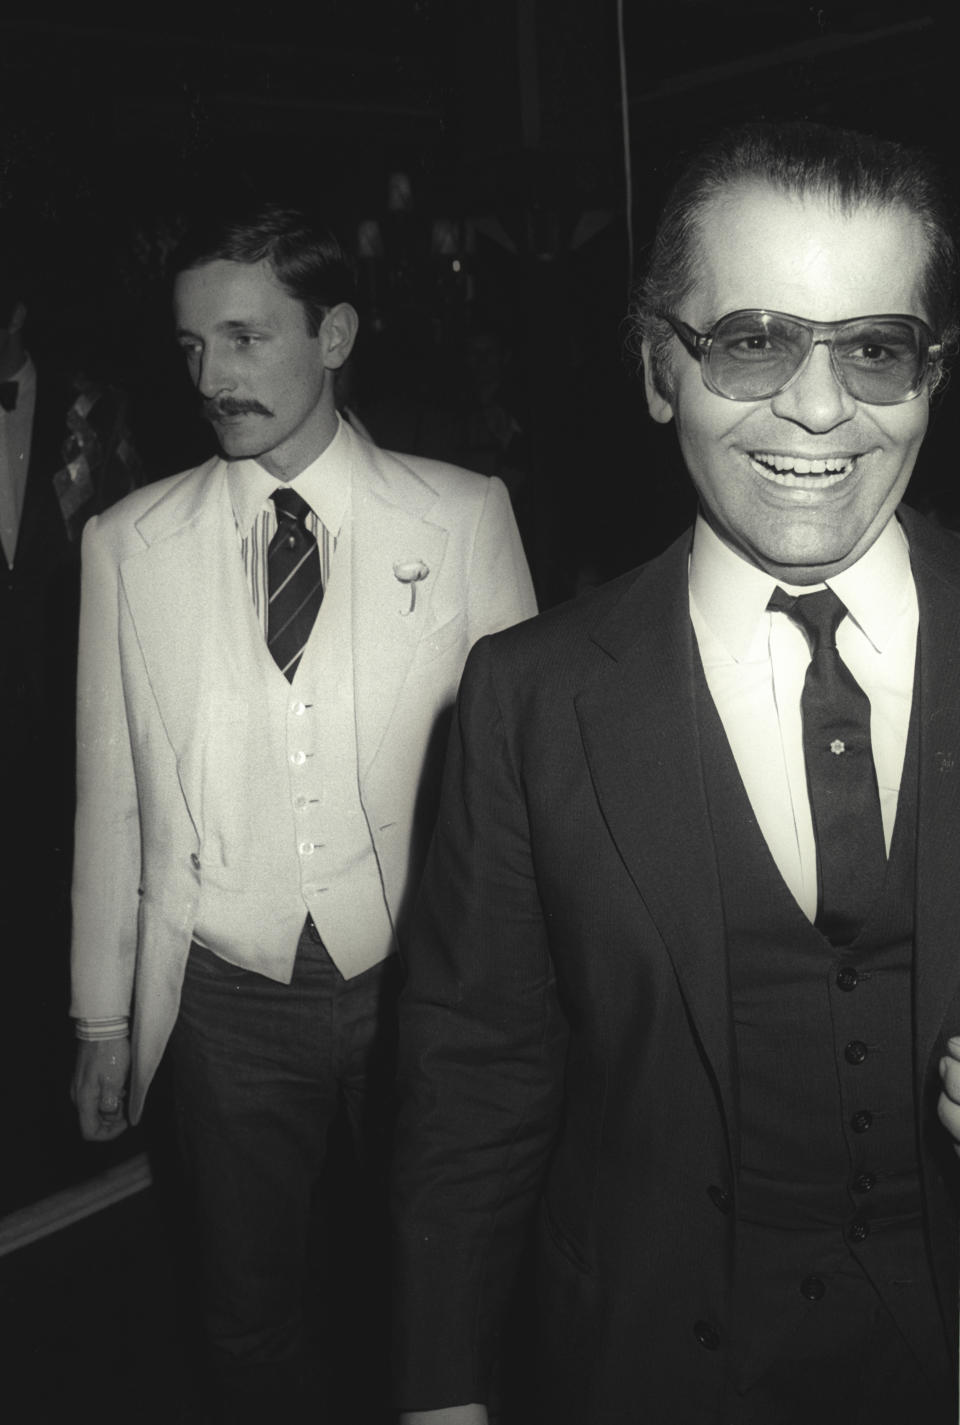 Jacques de Bascher and Karl Lagerfeld in Paris in 1979.